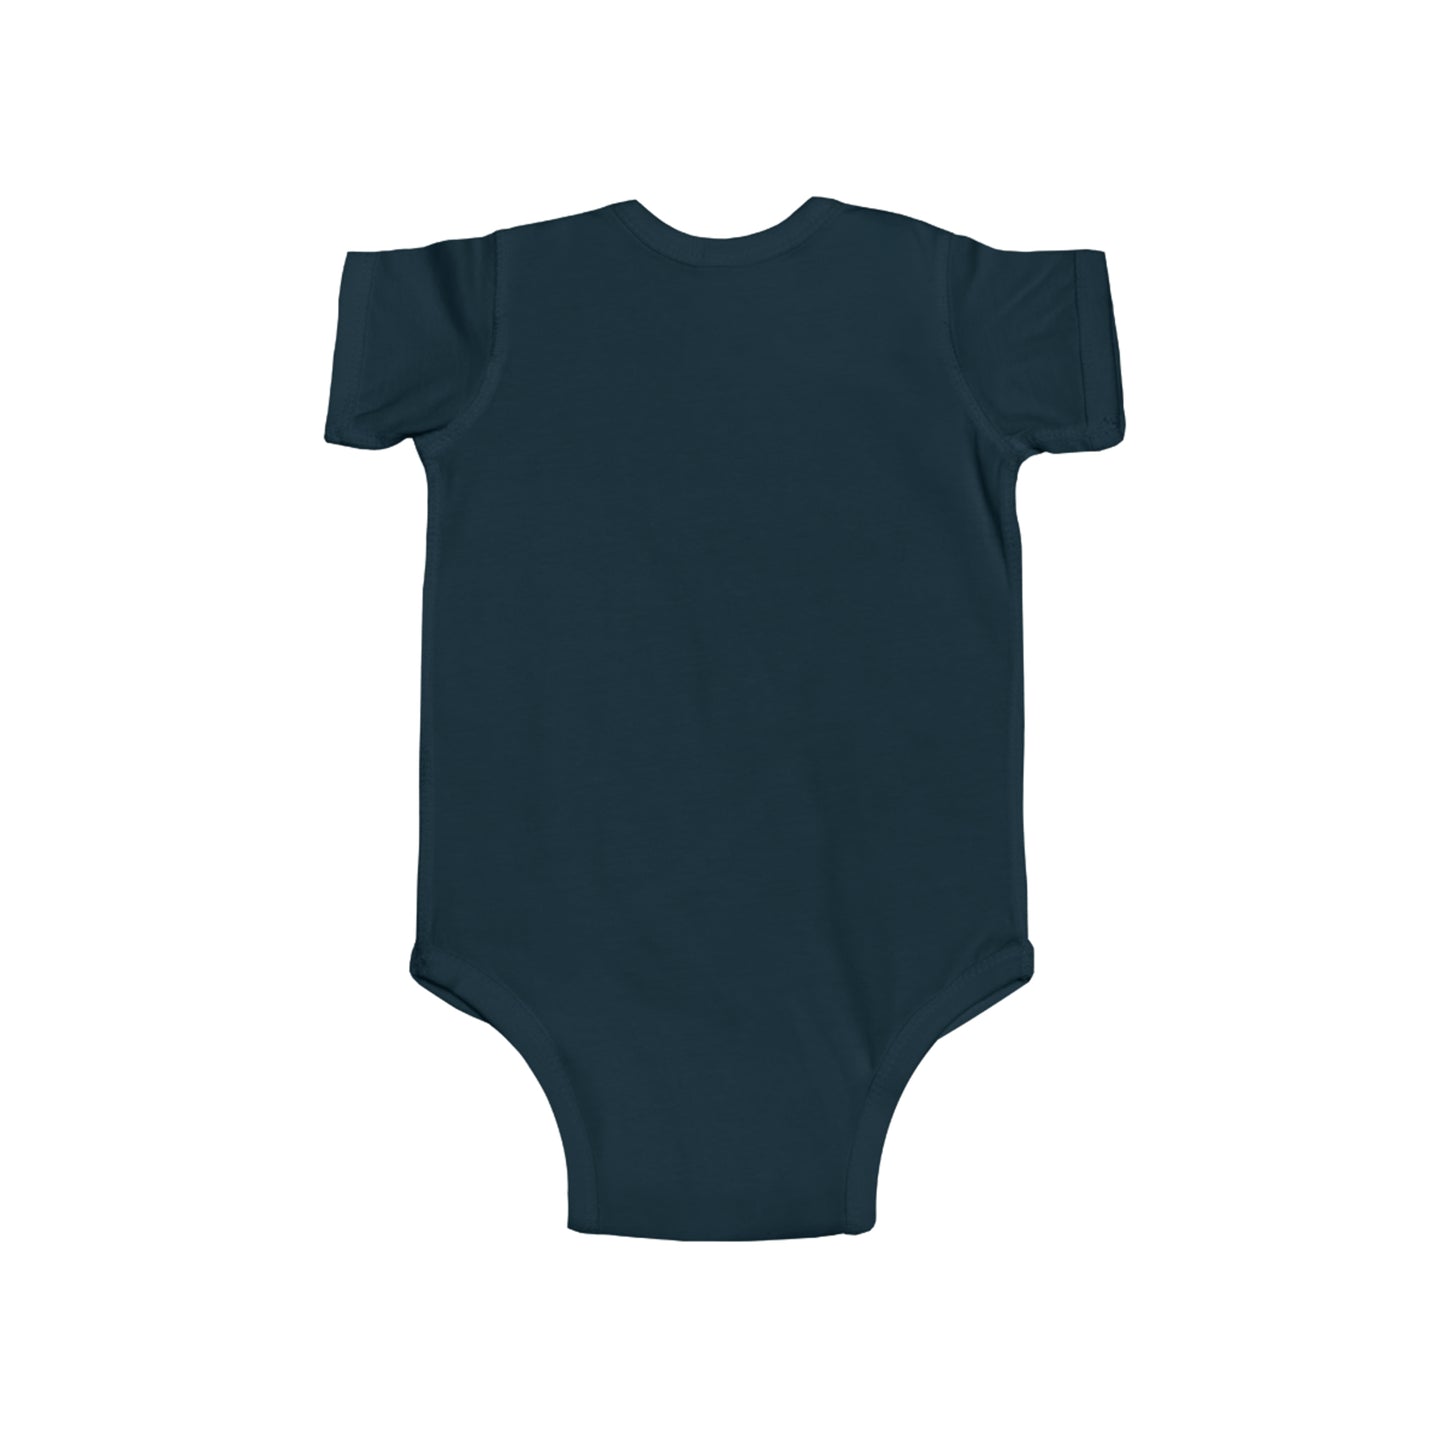 Infant Fine Jersey Bodysuit - Born to Own Real Estate